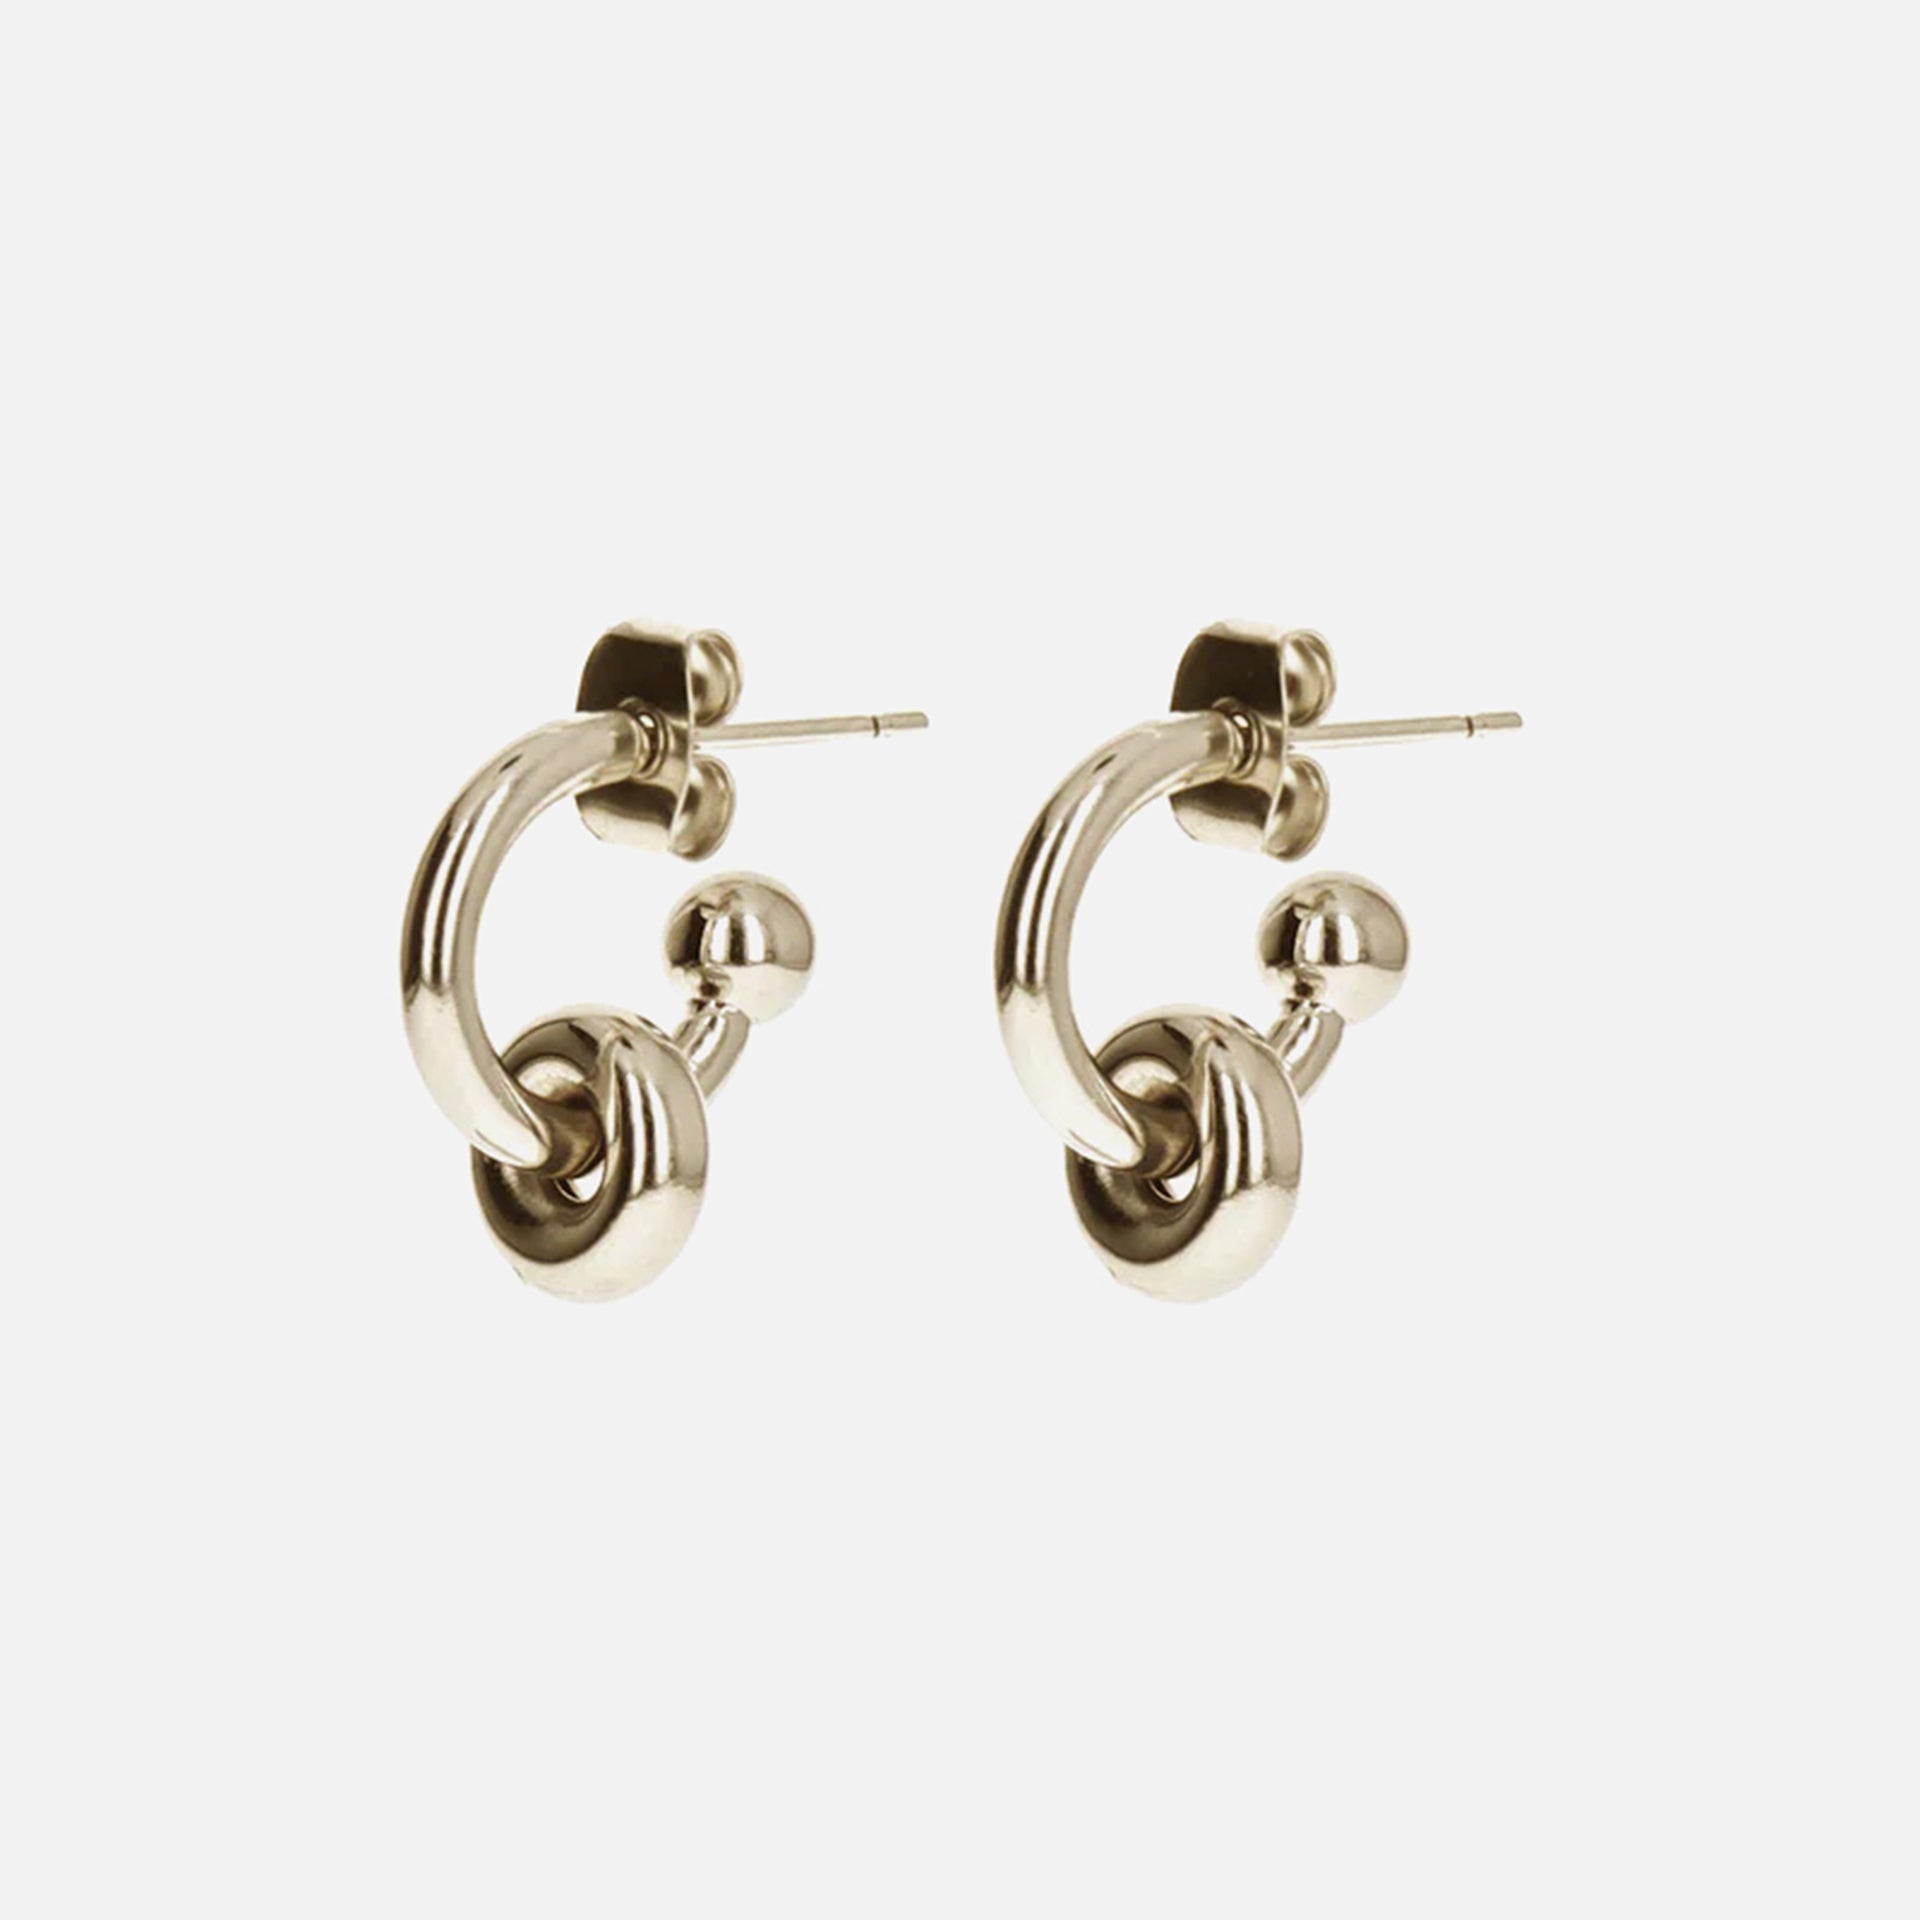 Justine Clenquet Ethan Earrings - Gold